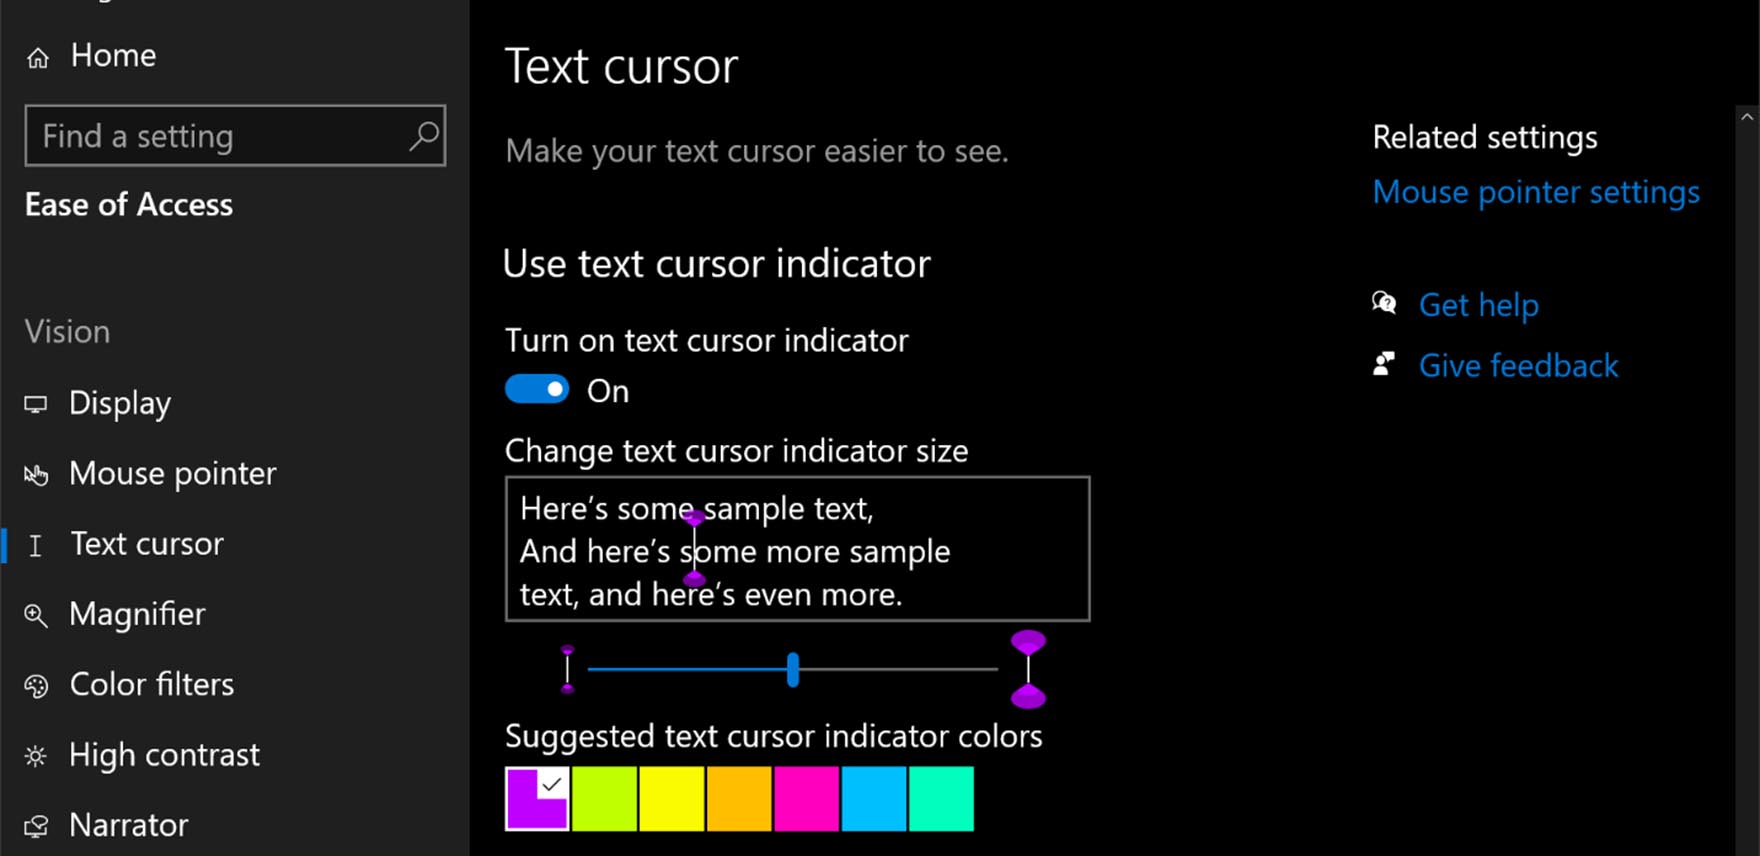 New Ease of Access settings that make text cursors easier to see and use